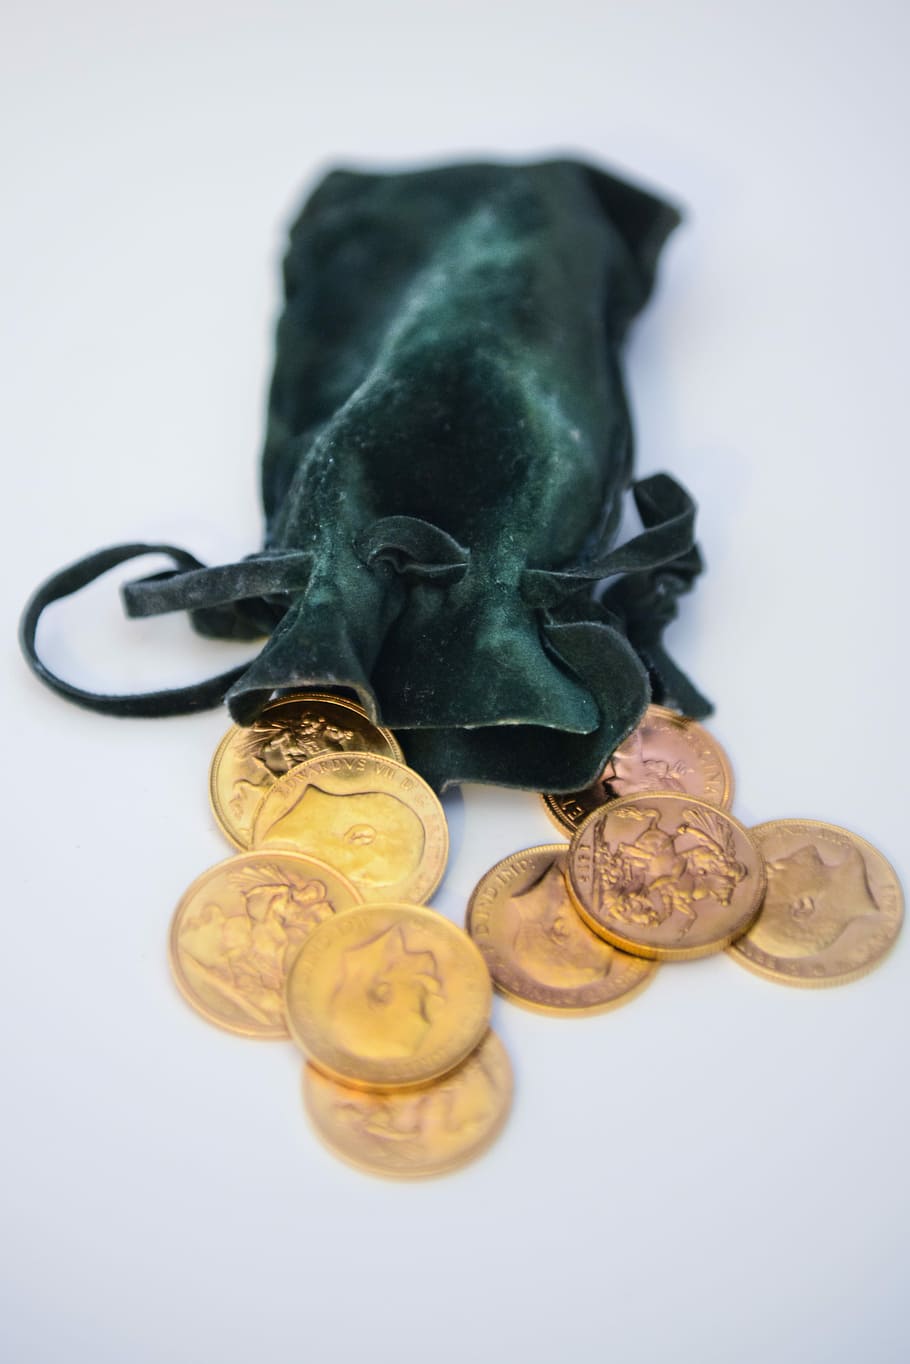 Gold, Coins, Money, Prosperity, gold, coins, white background, studio shot, close-up, indoors, still life